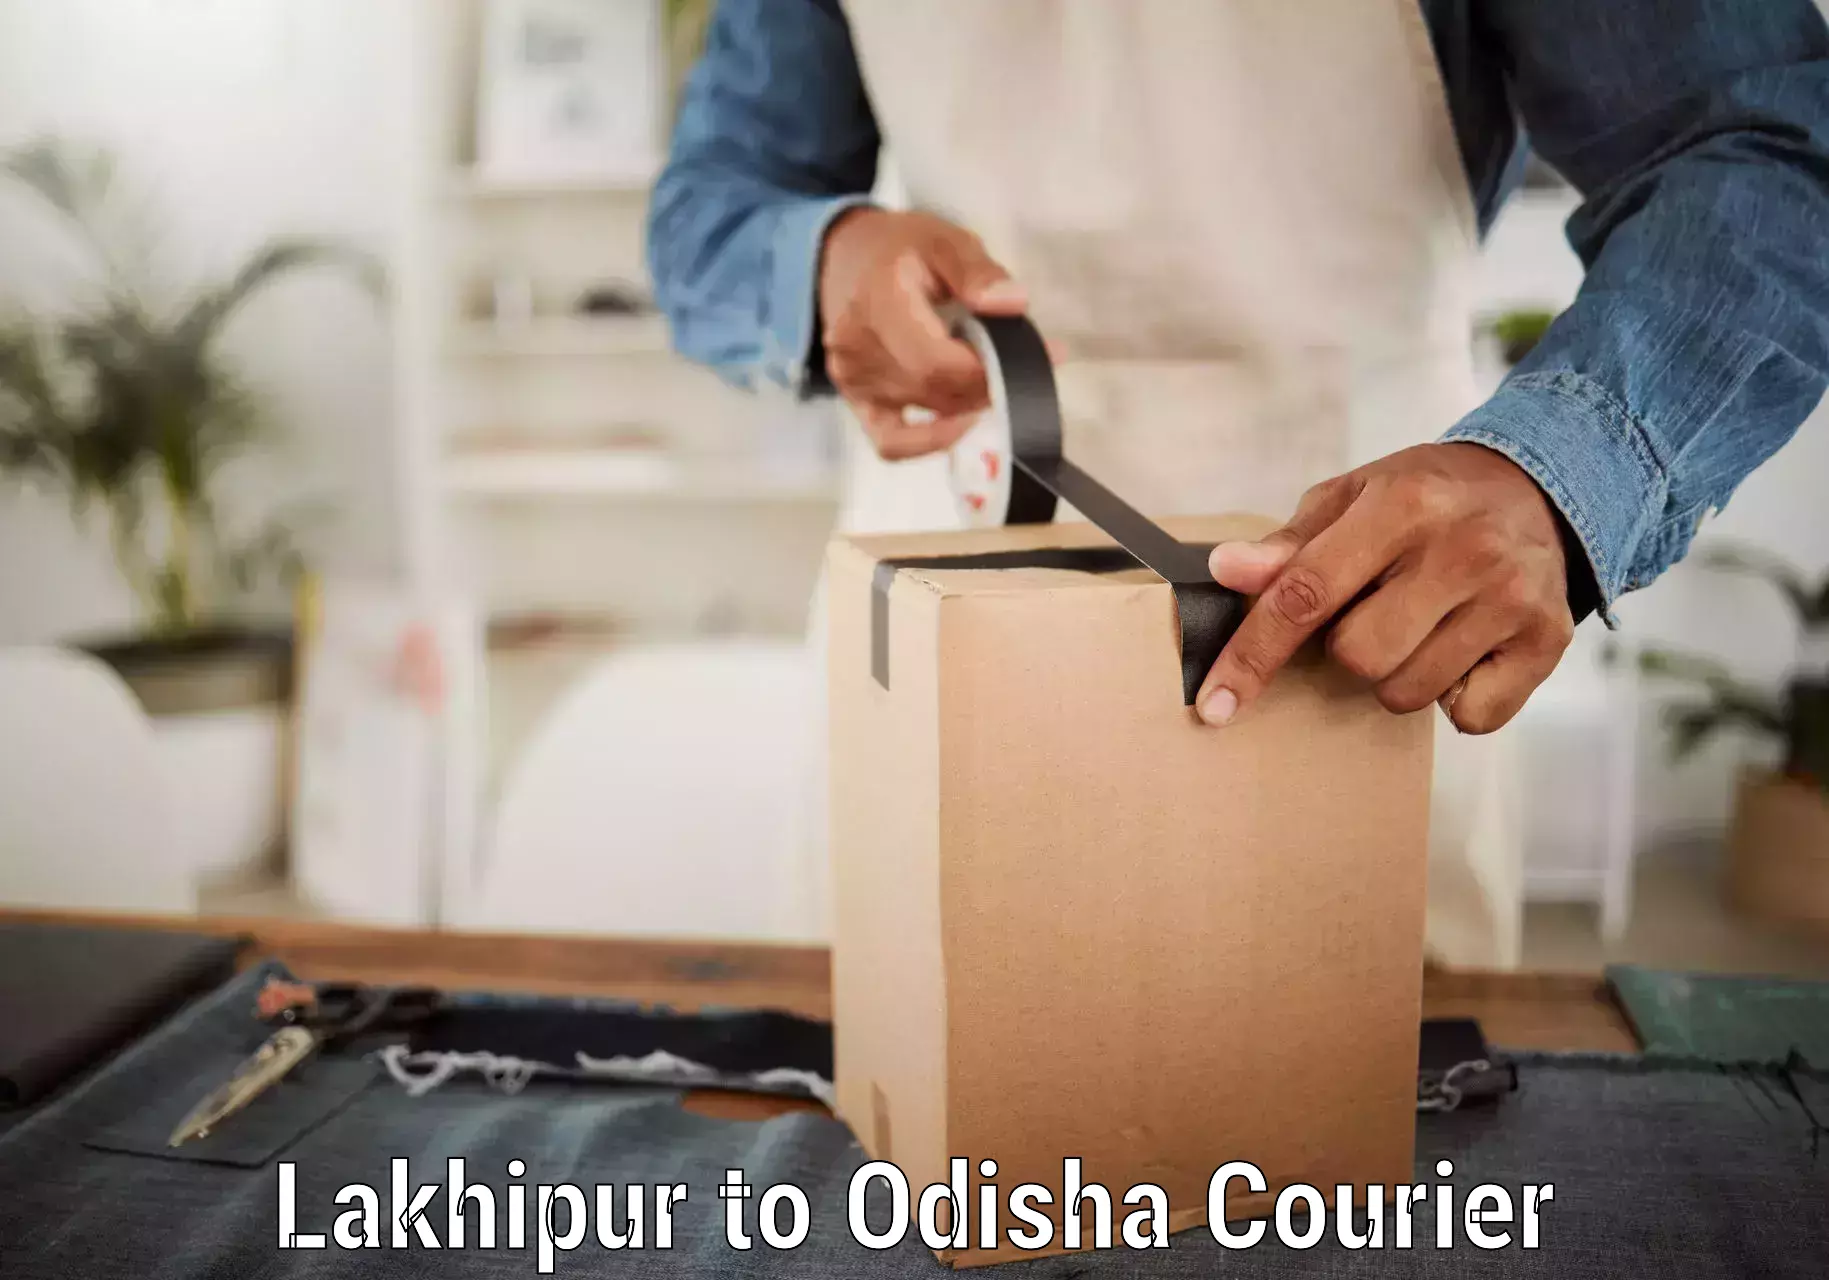 Smart parcel tracking in Lakhipur to Bhadrak